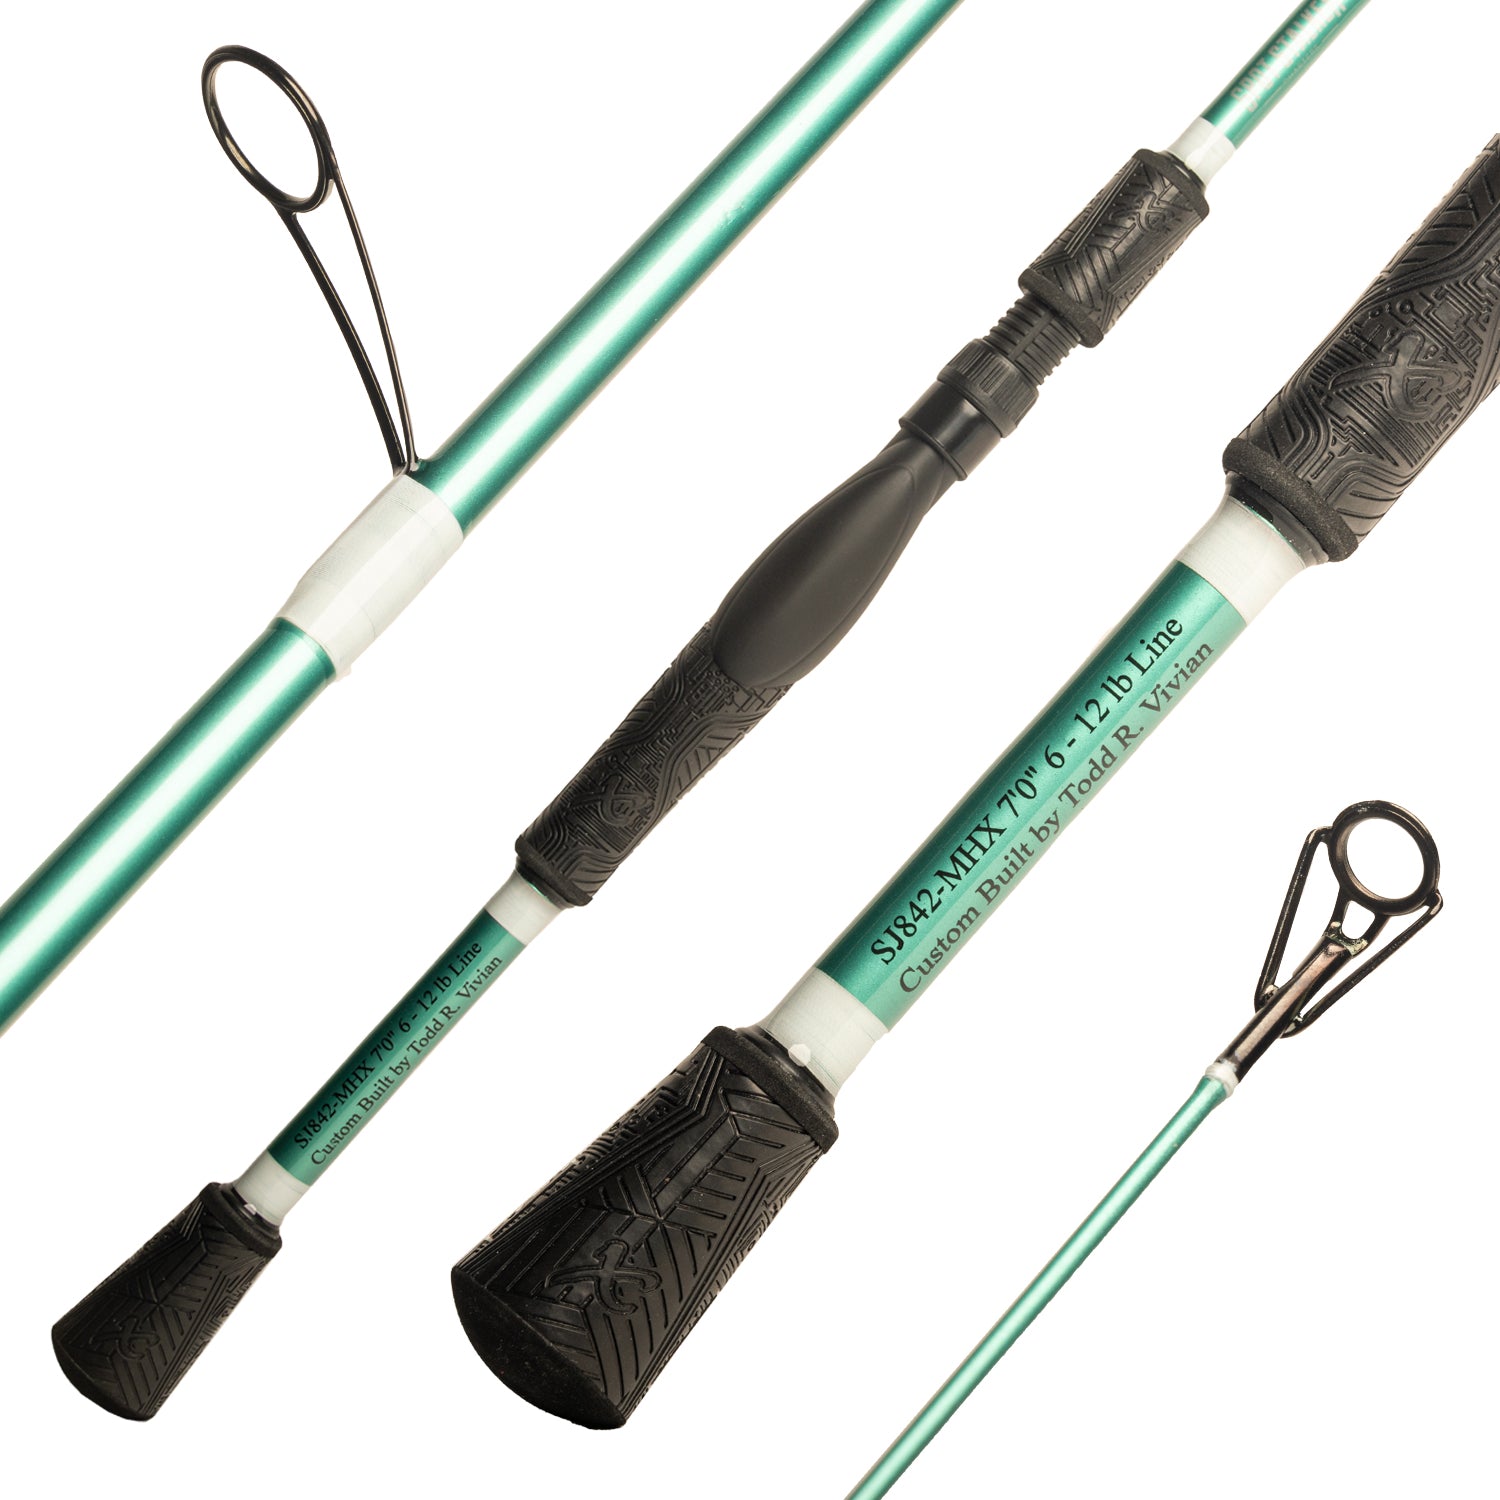 Rod Building Equipment - CRB Products  Fishing rod, Rod building supplies,  Rod